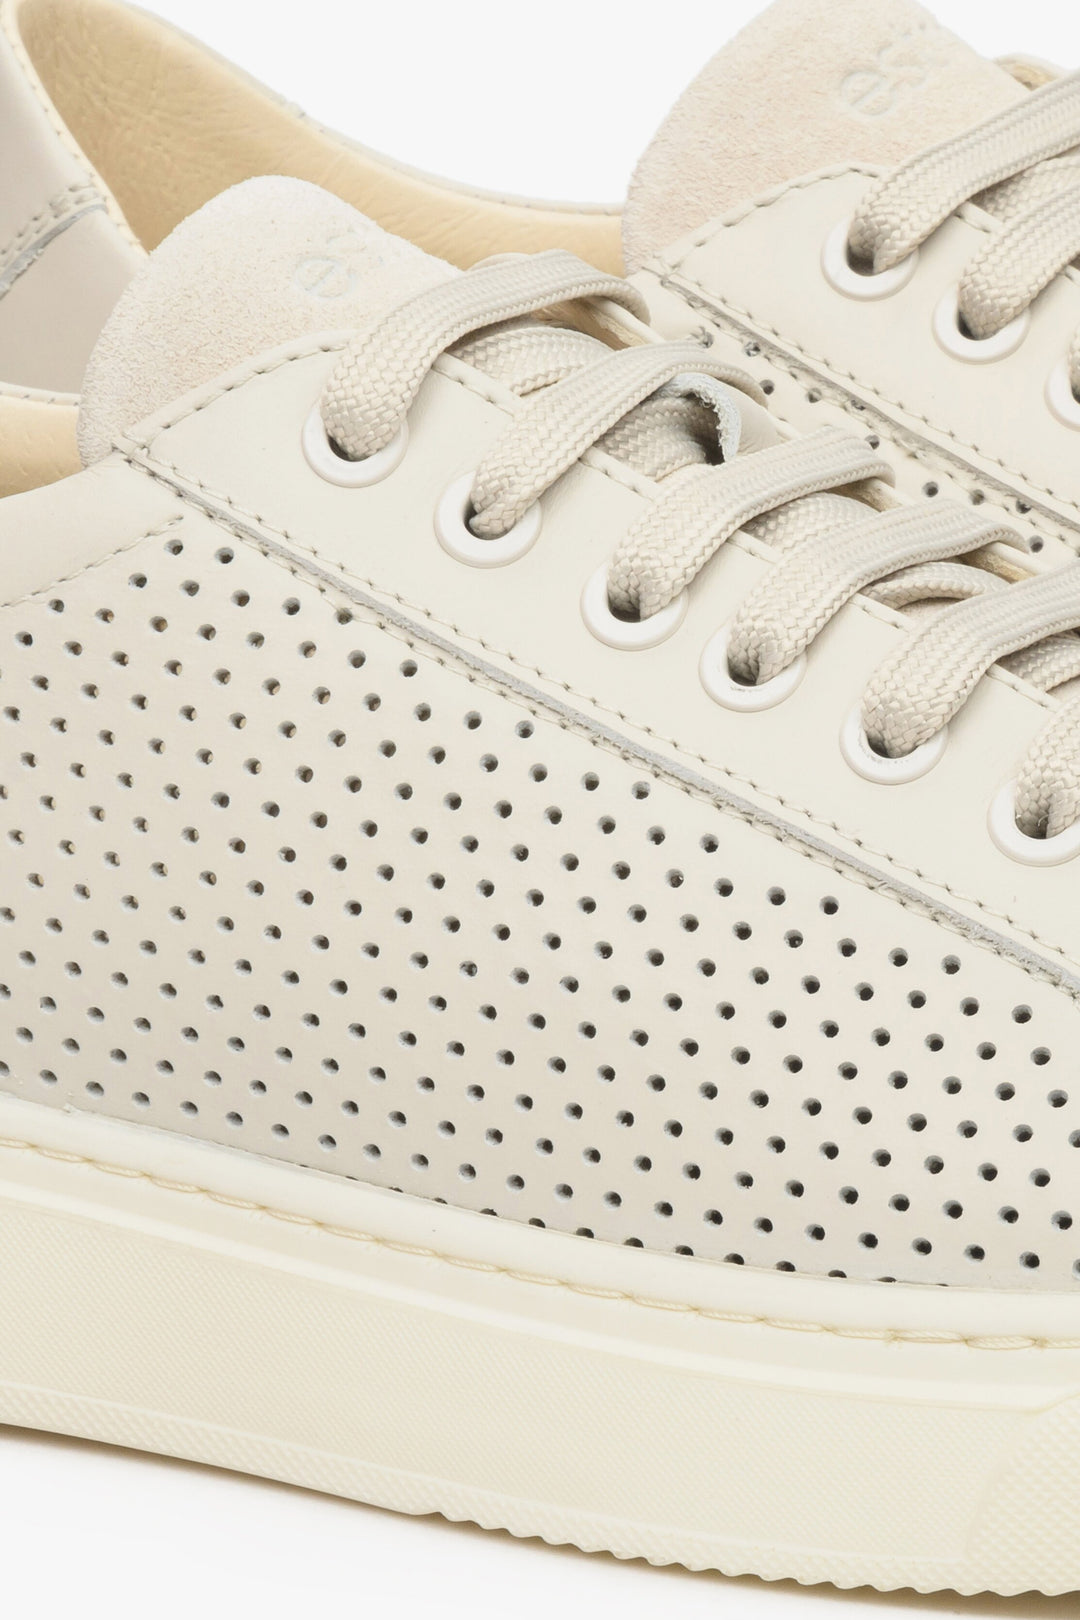 Women's beige Estro fall/spring sneakers - close-up on details.